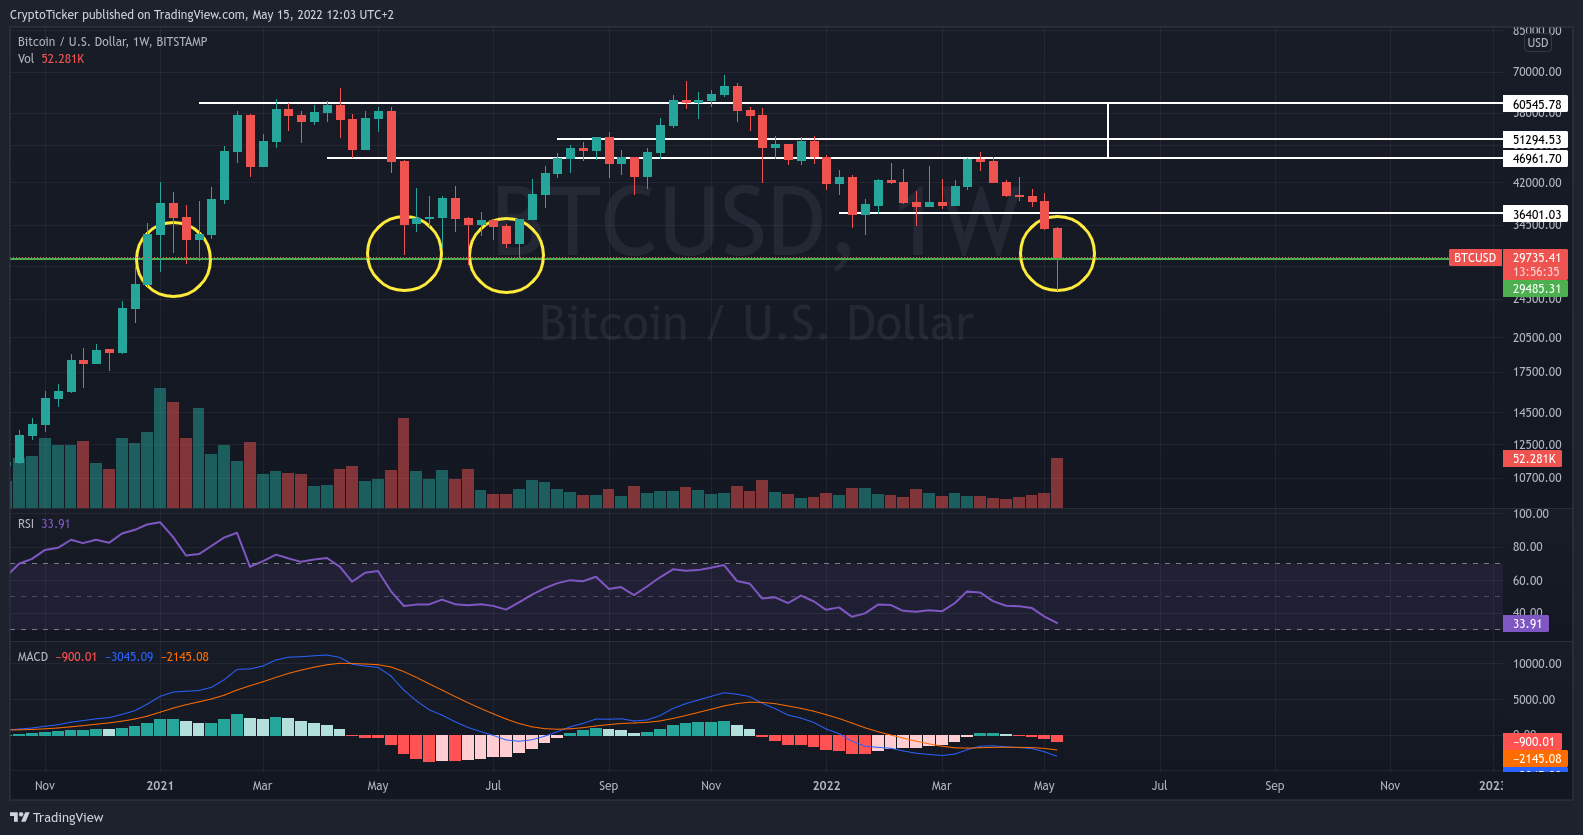 BTC/USD 1-week chart showing the strong support level for BTC